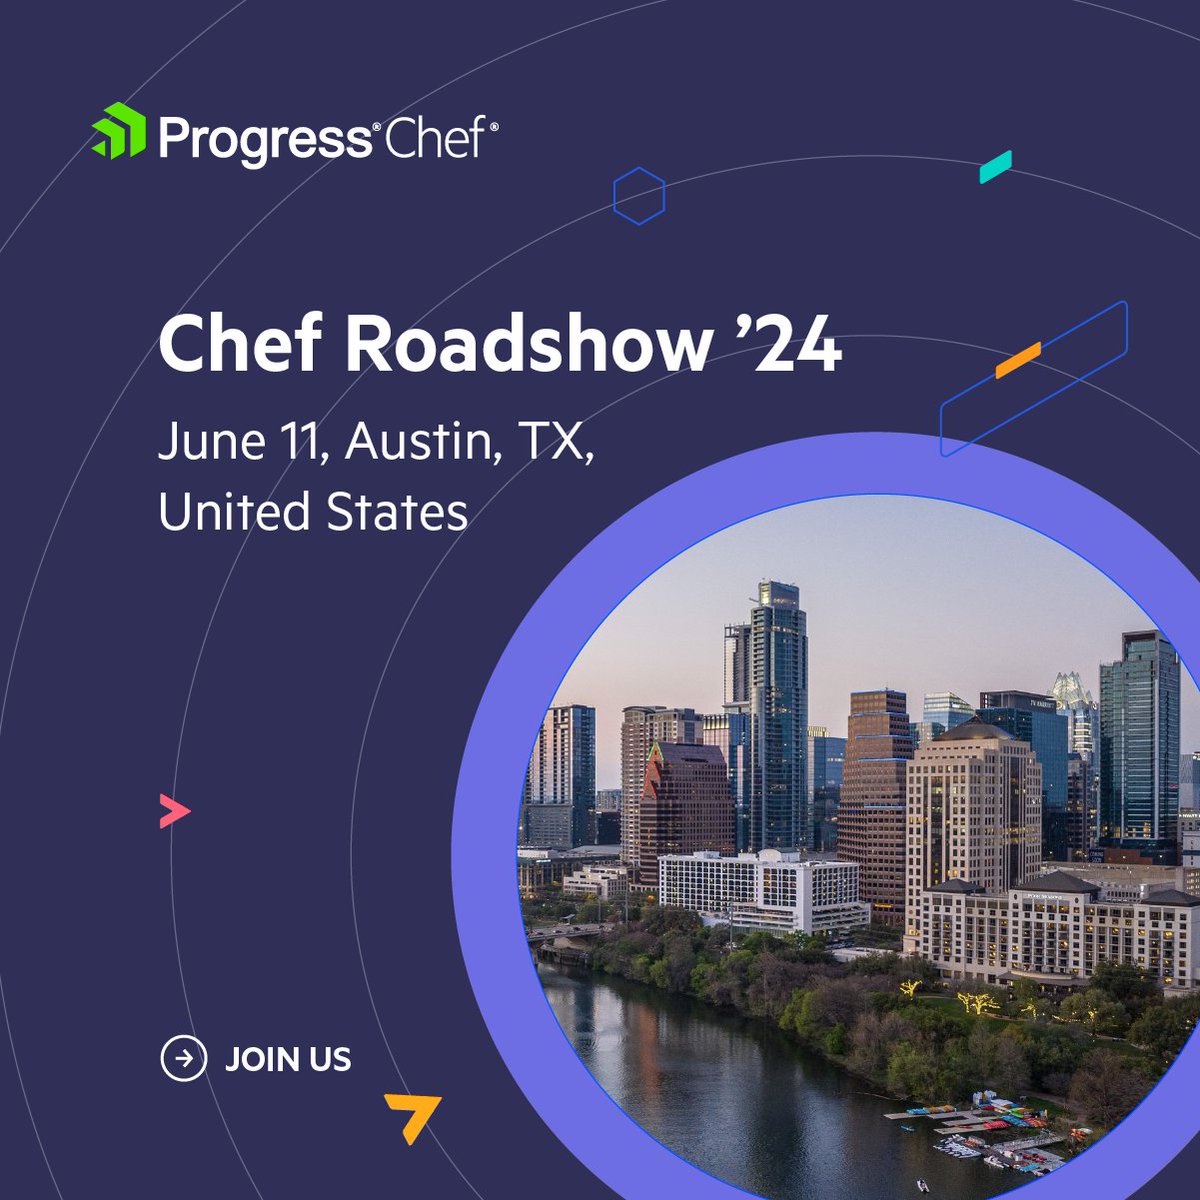 Following on from the success of last year, we are bringing the Chef Roadshow back to Austin, this time with more insights, more session options and the anticipated Chef Social! prgress.co/3URTBtx #ChefRoadshow #ChefSocial #ProgressChef